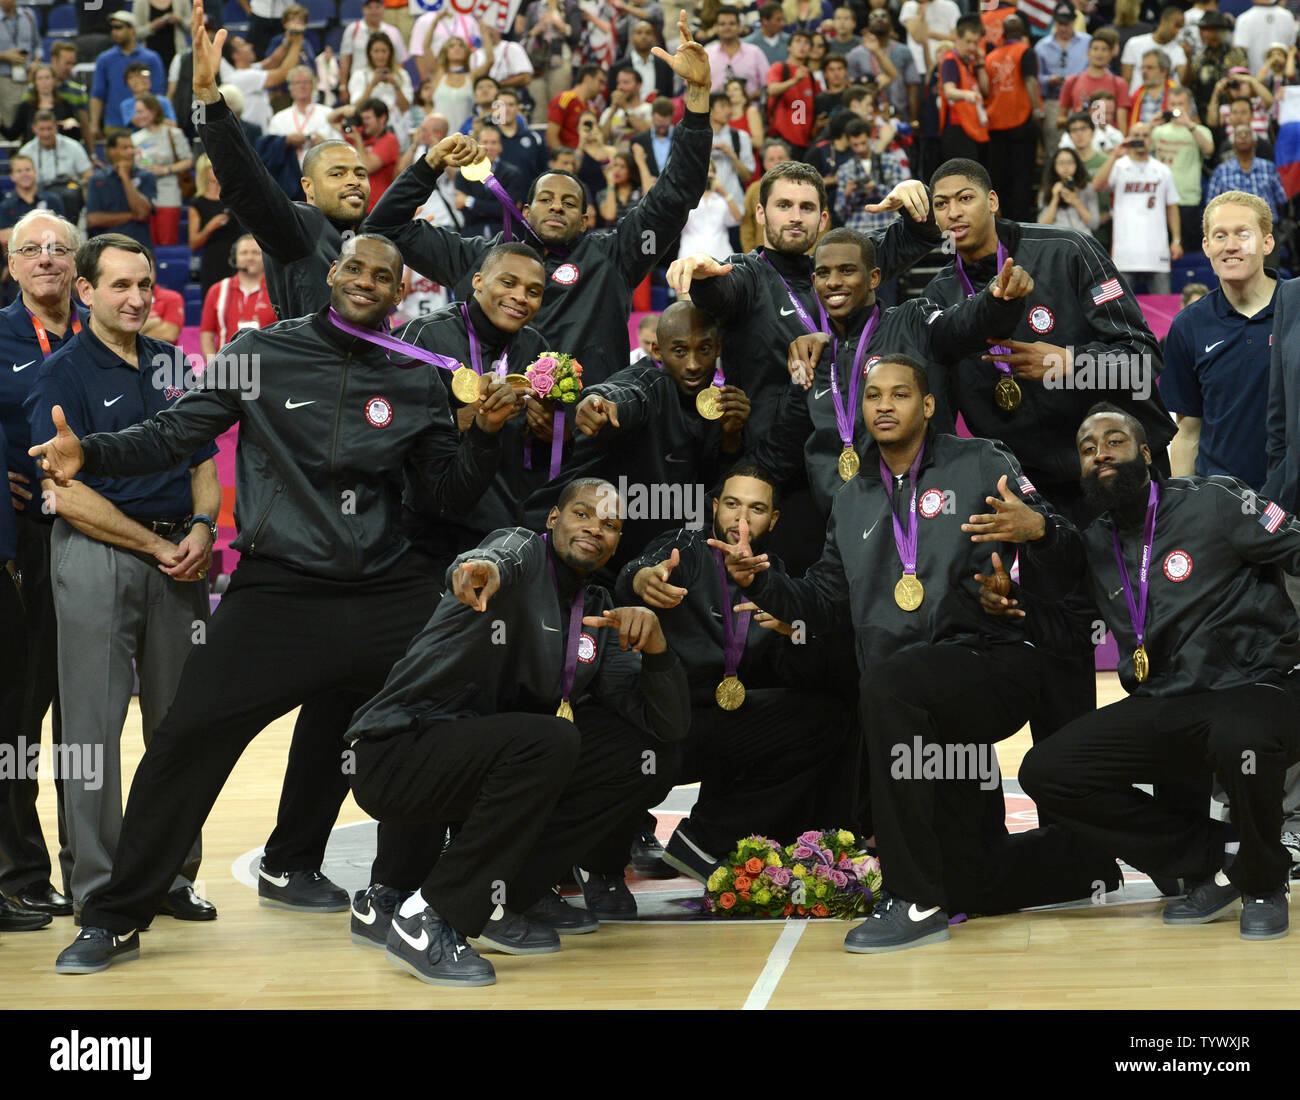 Members Of The United States Men S Basketball Team Pose For A Group Photo After Receiving Their Gold Medals For Defeating Spain 107 100 At The 12 Summer Olympics August 12 12 In London